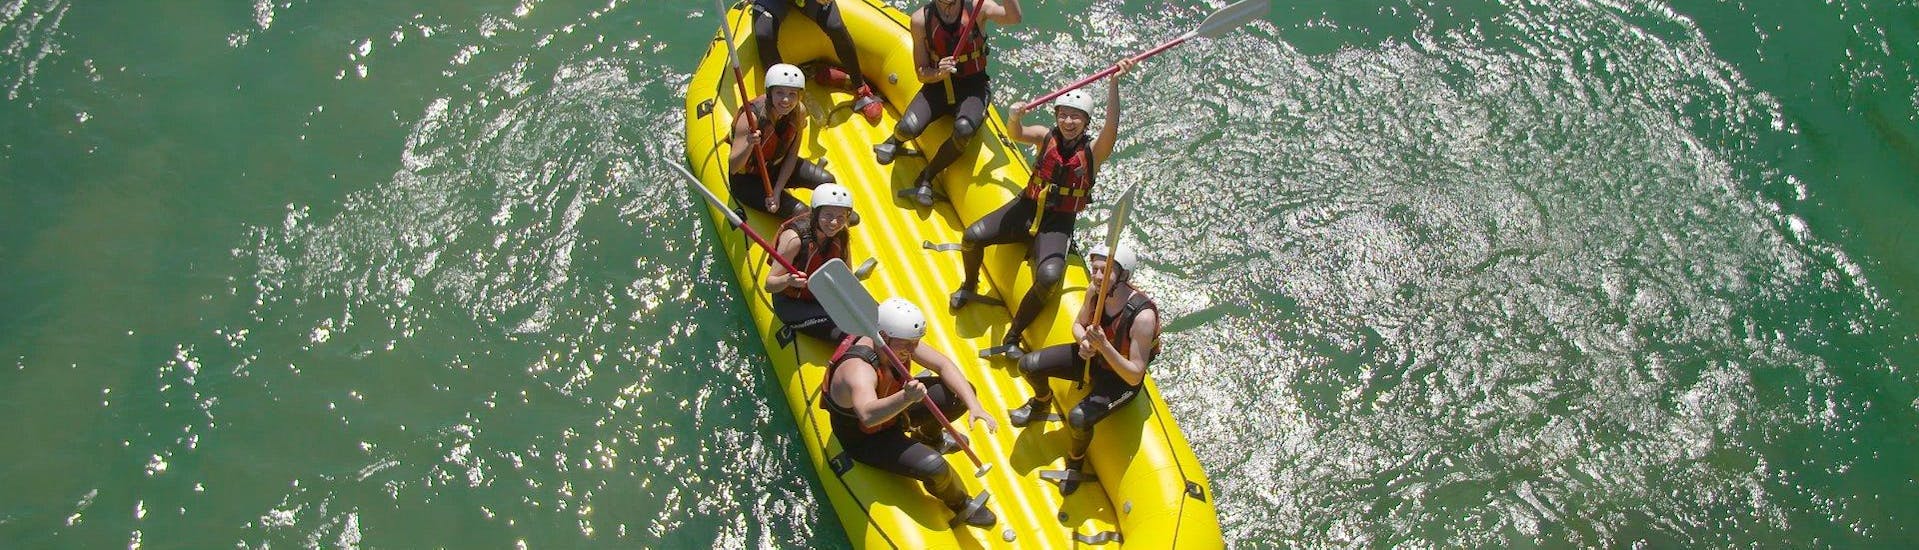 Rafting & Canyoning a Bled - Adventure Day.